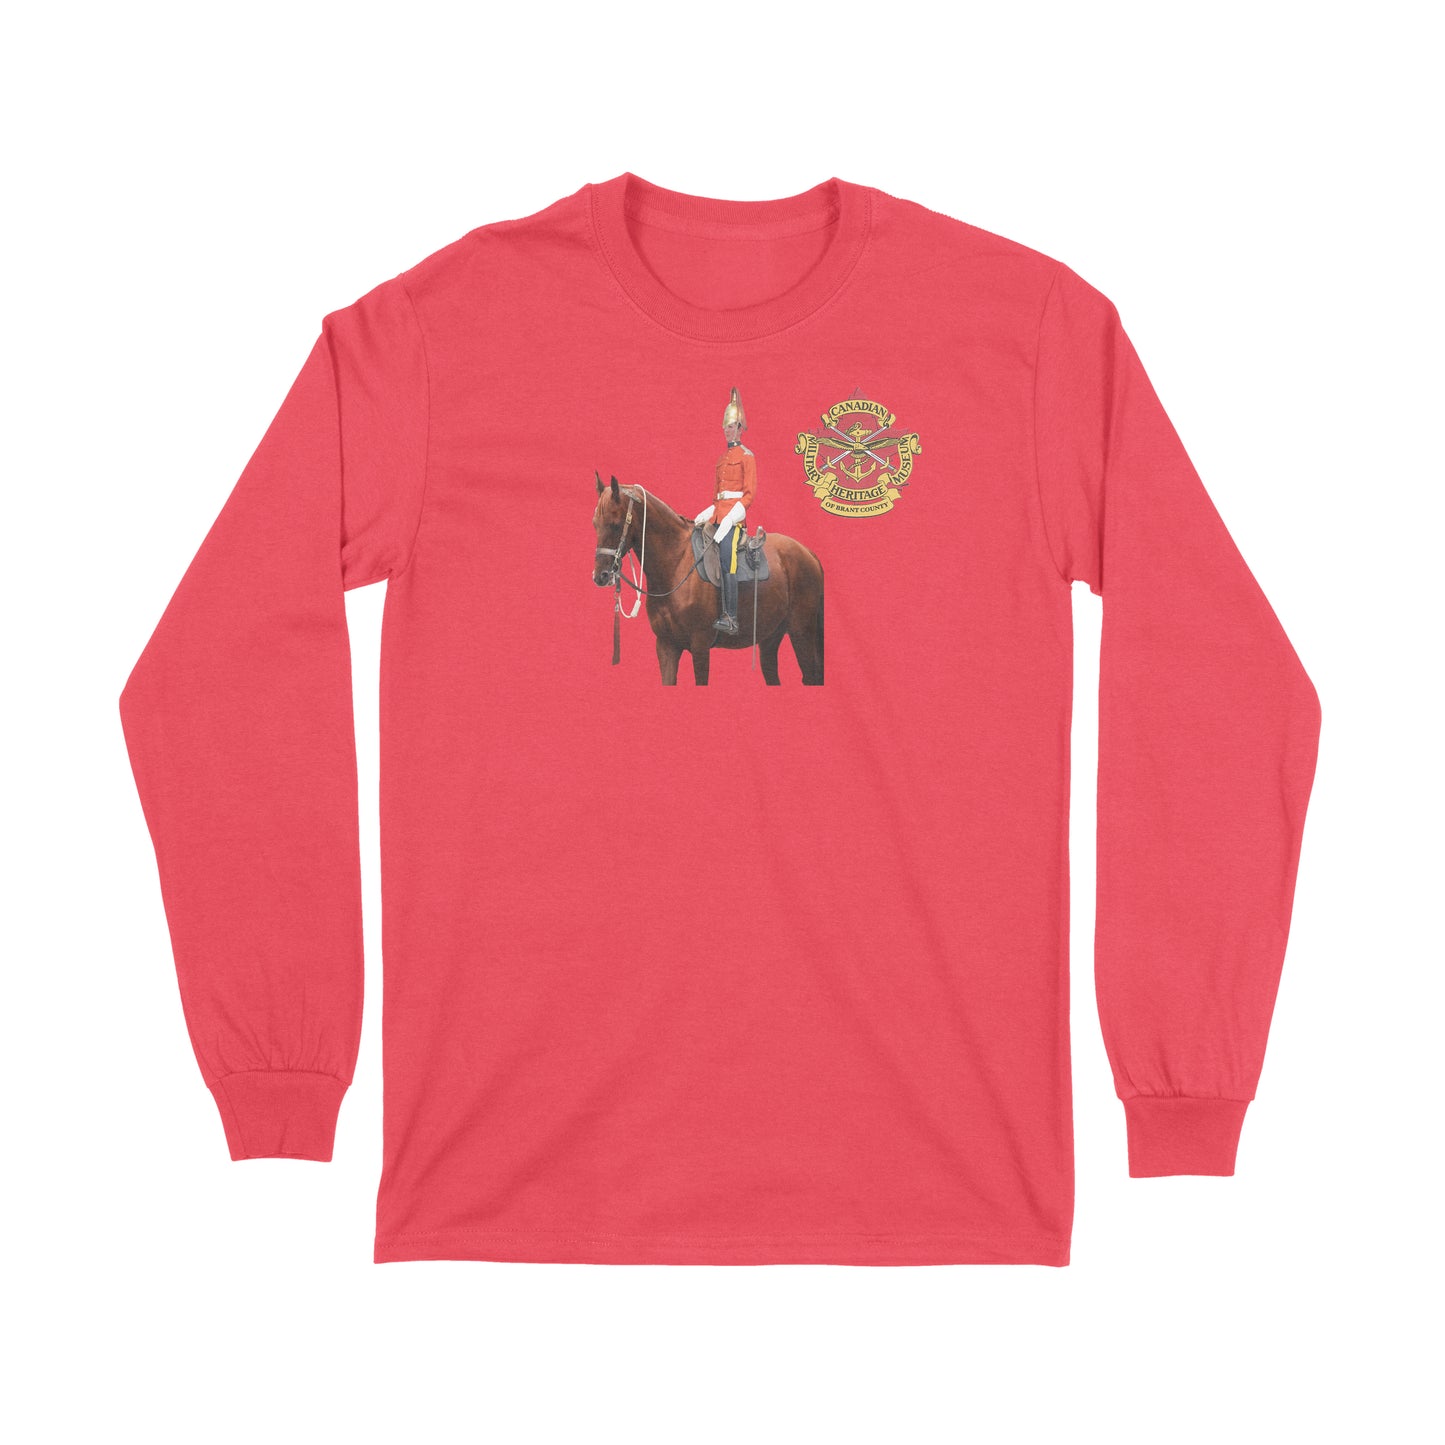 Brantford, Canadian Military Heritage Museum, Fat Dave, Long Sleeve, Mounted Dragoon, Museum, Red